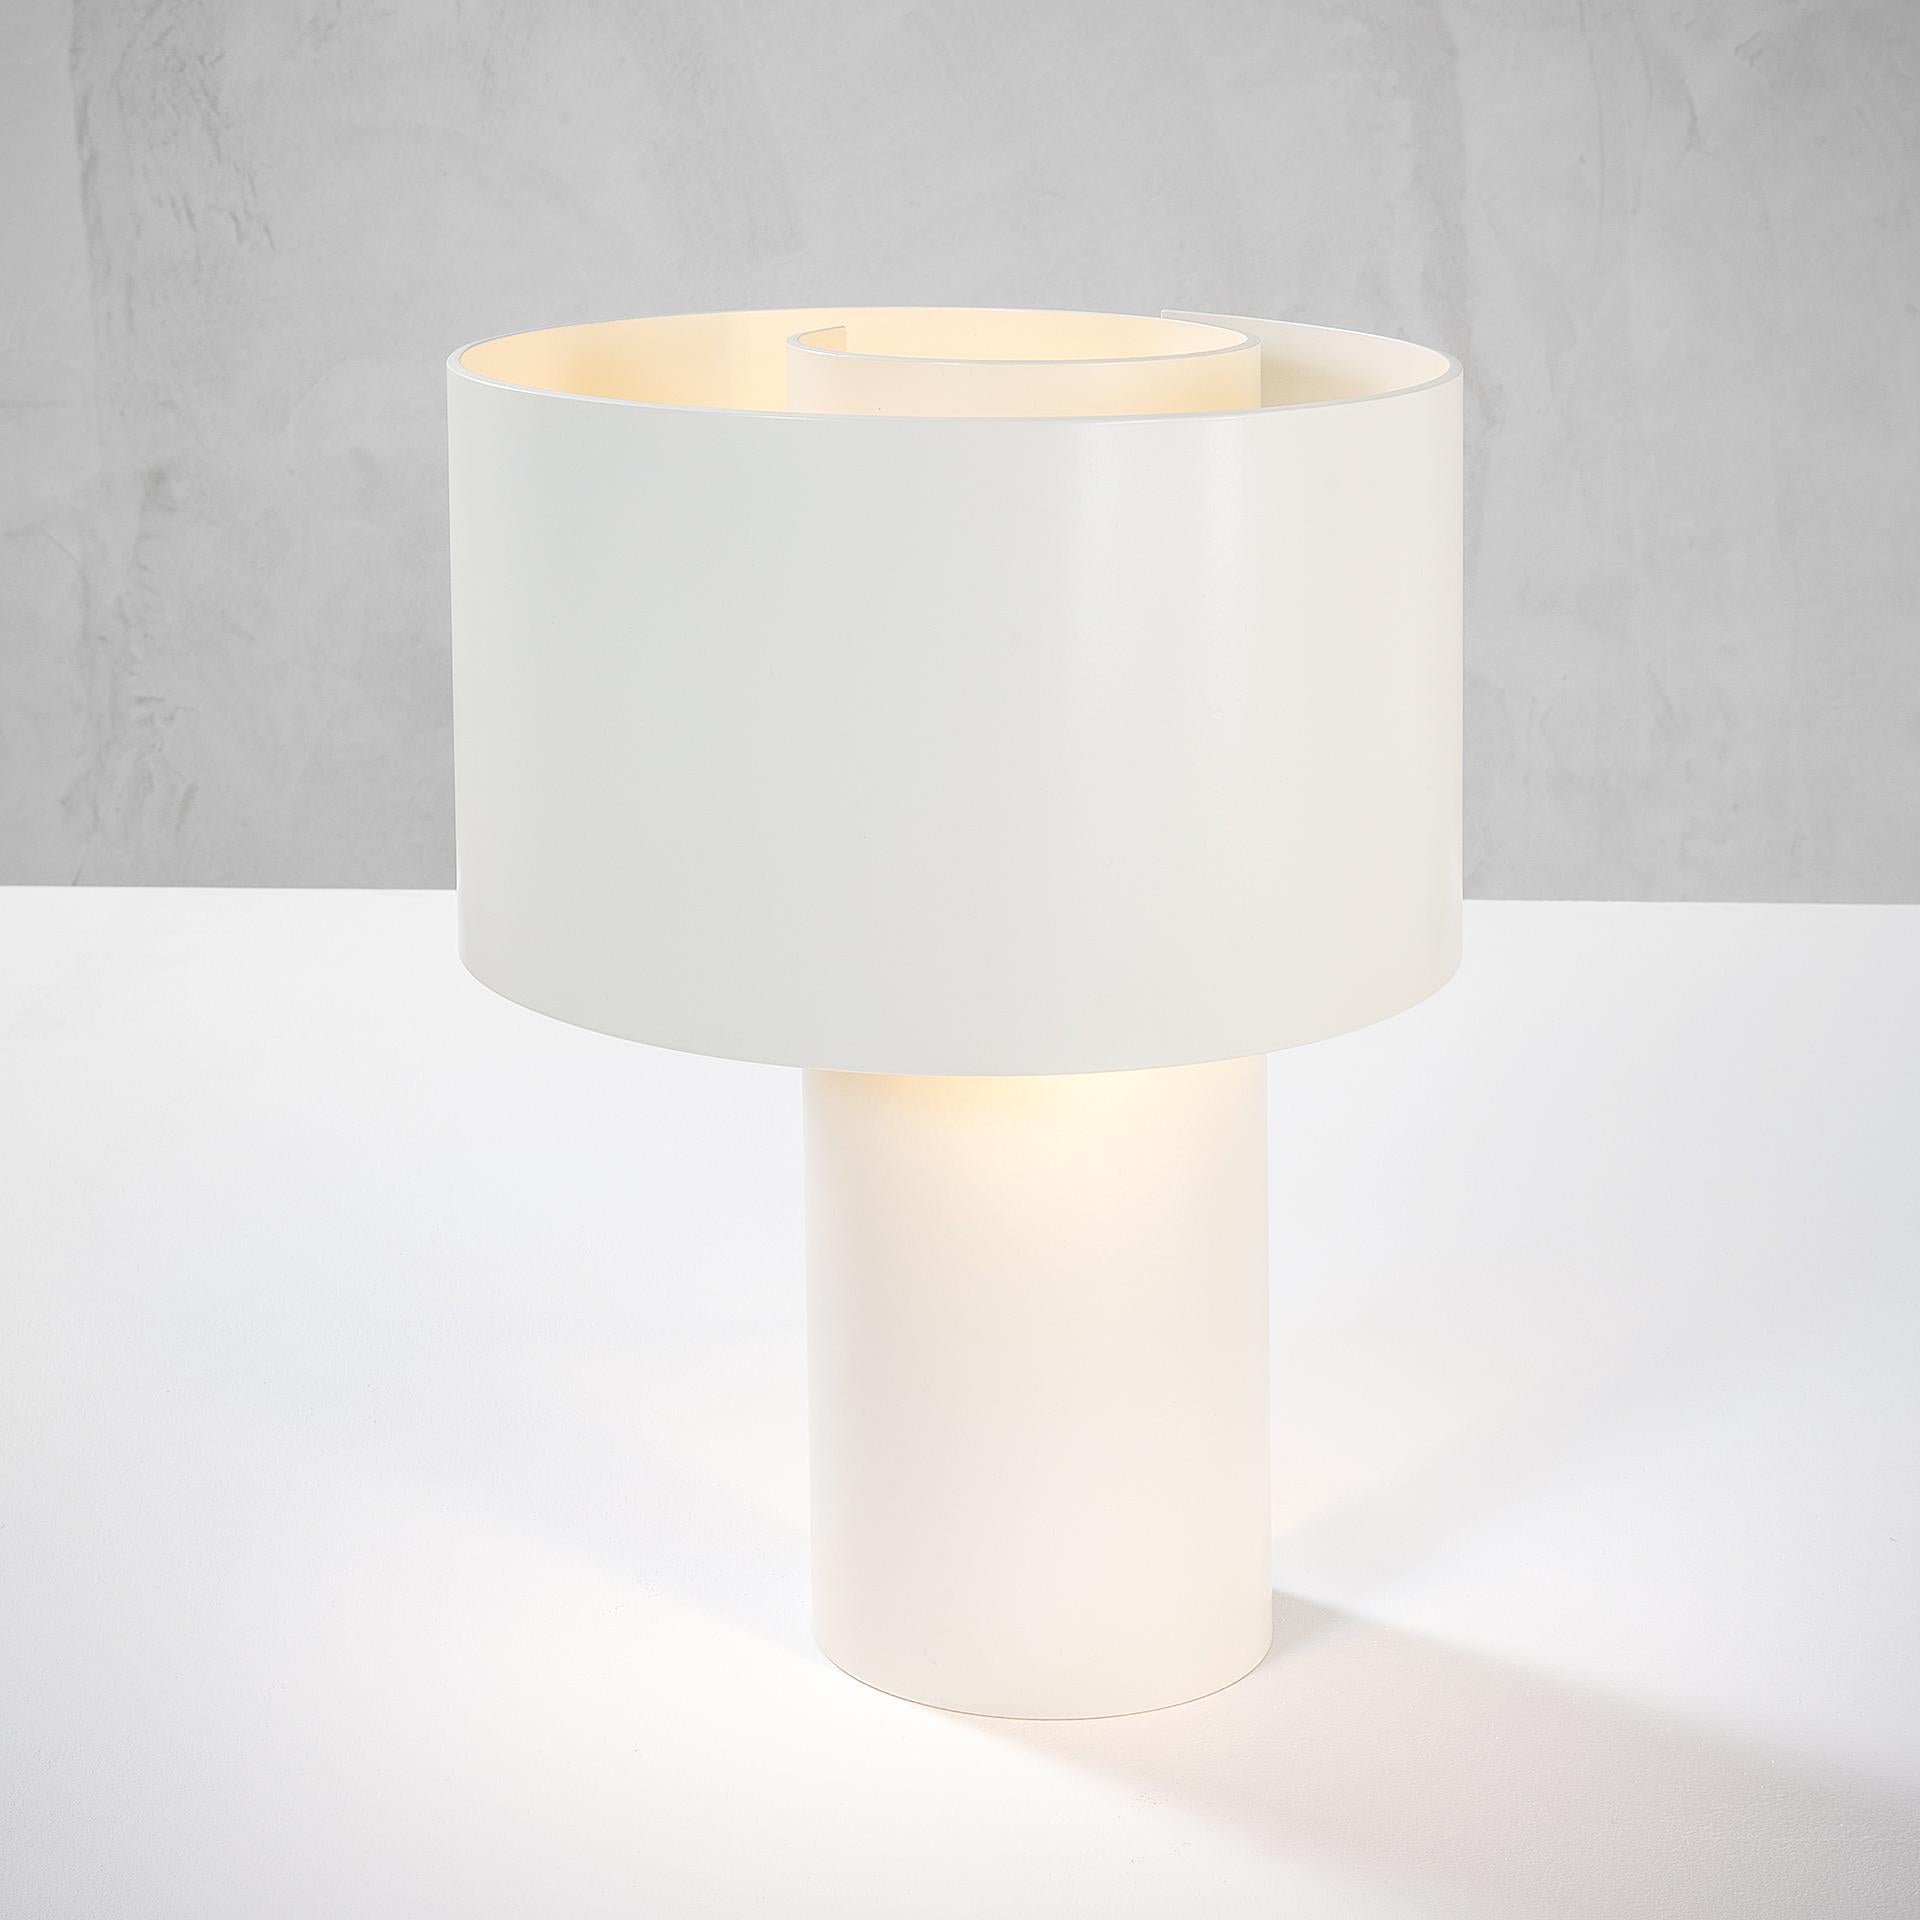 This table lamp was designed by Ingrid Hsalmarson in the 70s for New Lamp. It is entirely in white lacquered aluminum, made up of a simple straight base and a peculiar diffuser made of aluminum in the shape of a Spiral (here the name 